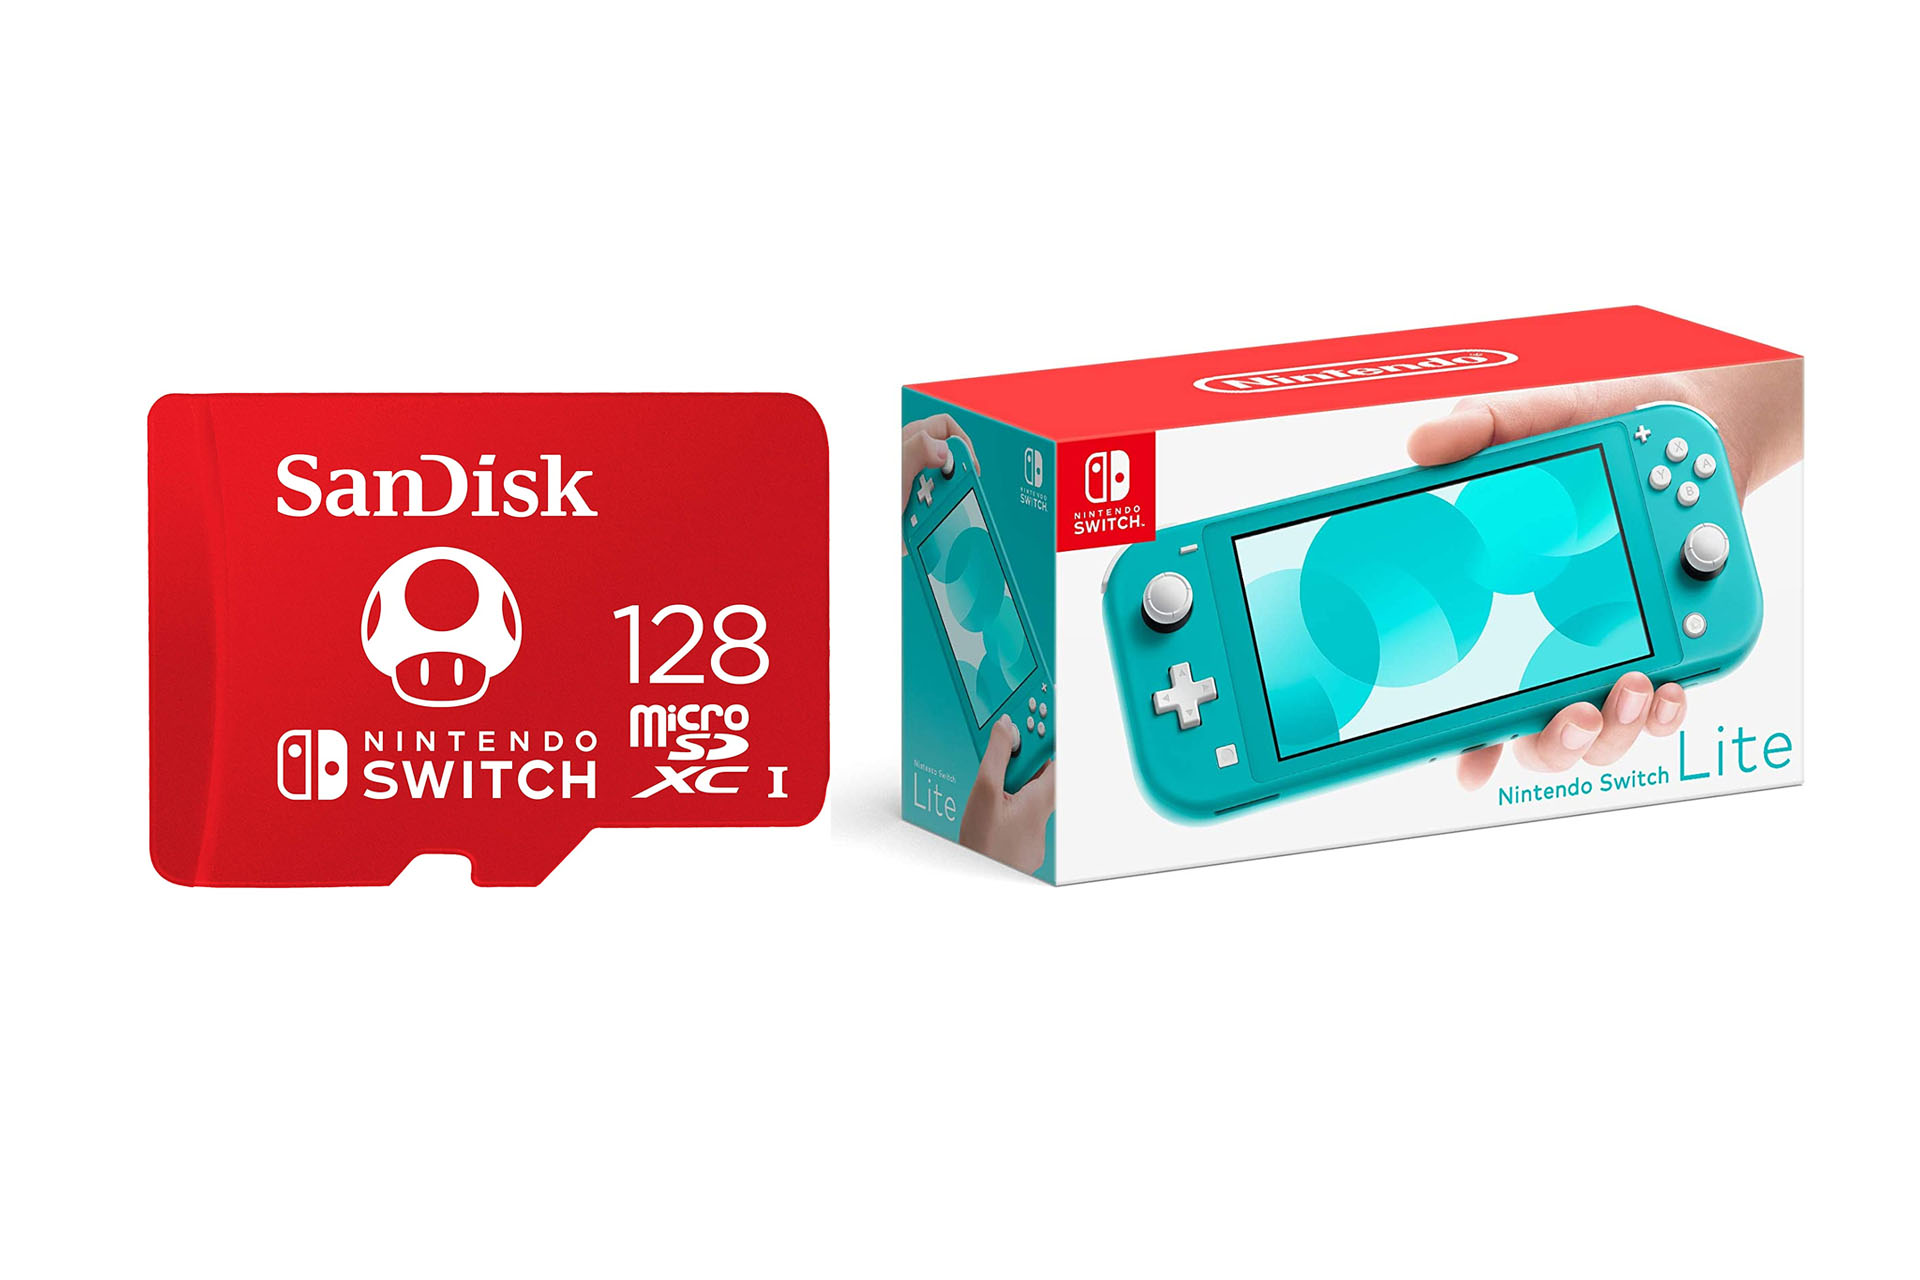 Product shots of both the Nintendo switch lite in turquoise and the Nintendo 128GB MircoSD card